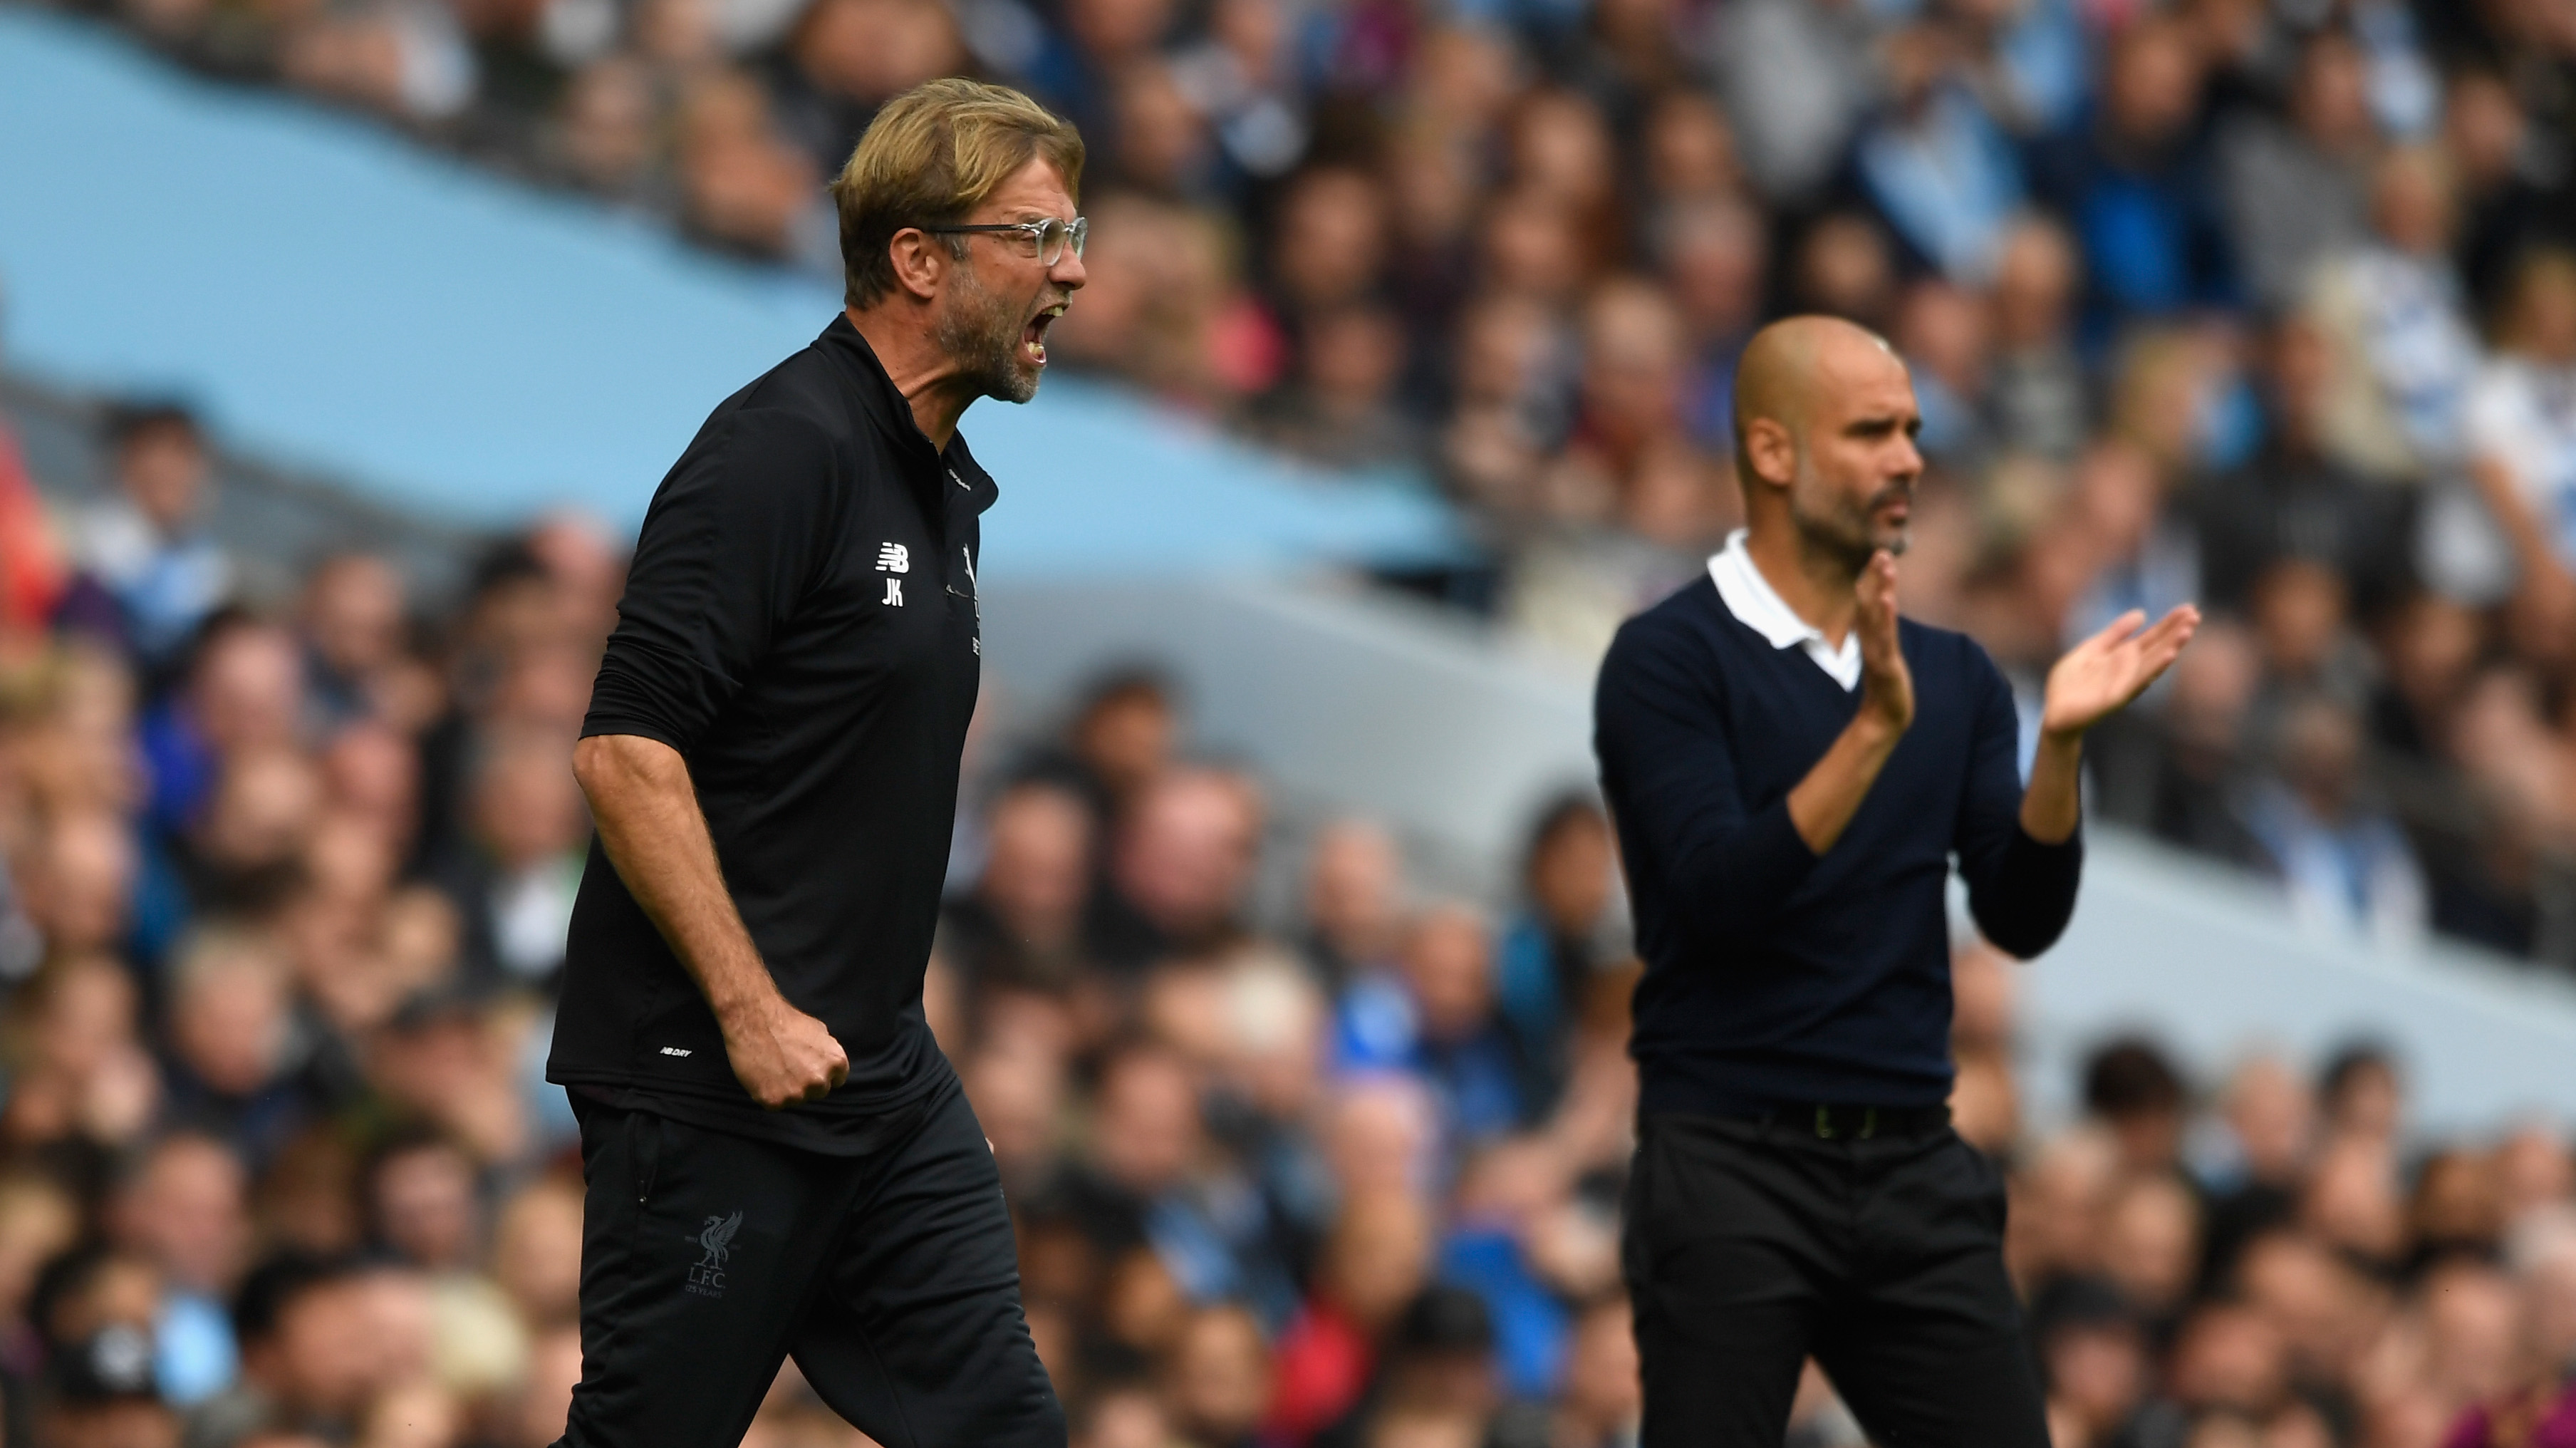 Will the Premier League title battle be ultimately fought  between Jurgen Klopp's Liverpool and Pep Guardiola's Manchester City? (Photo by Stu Forster/Getty Images)